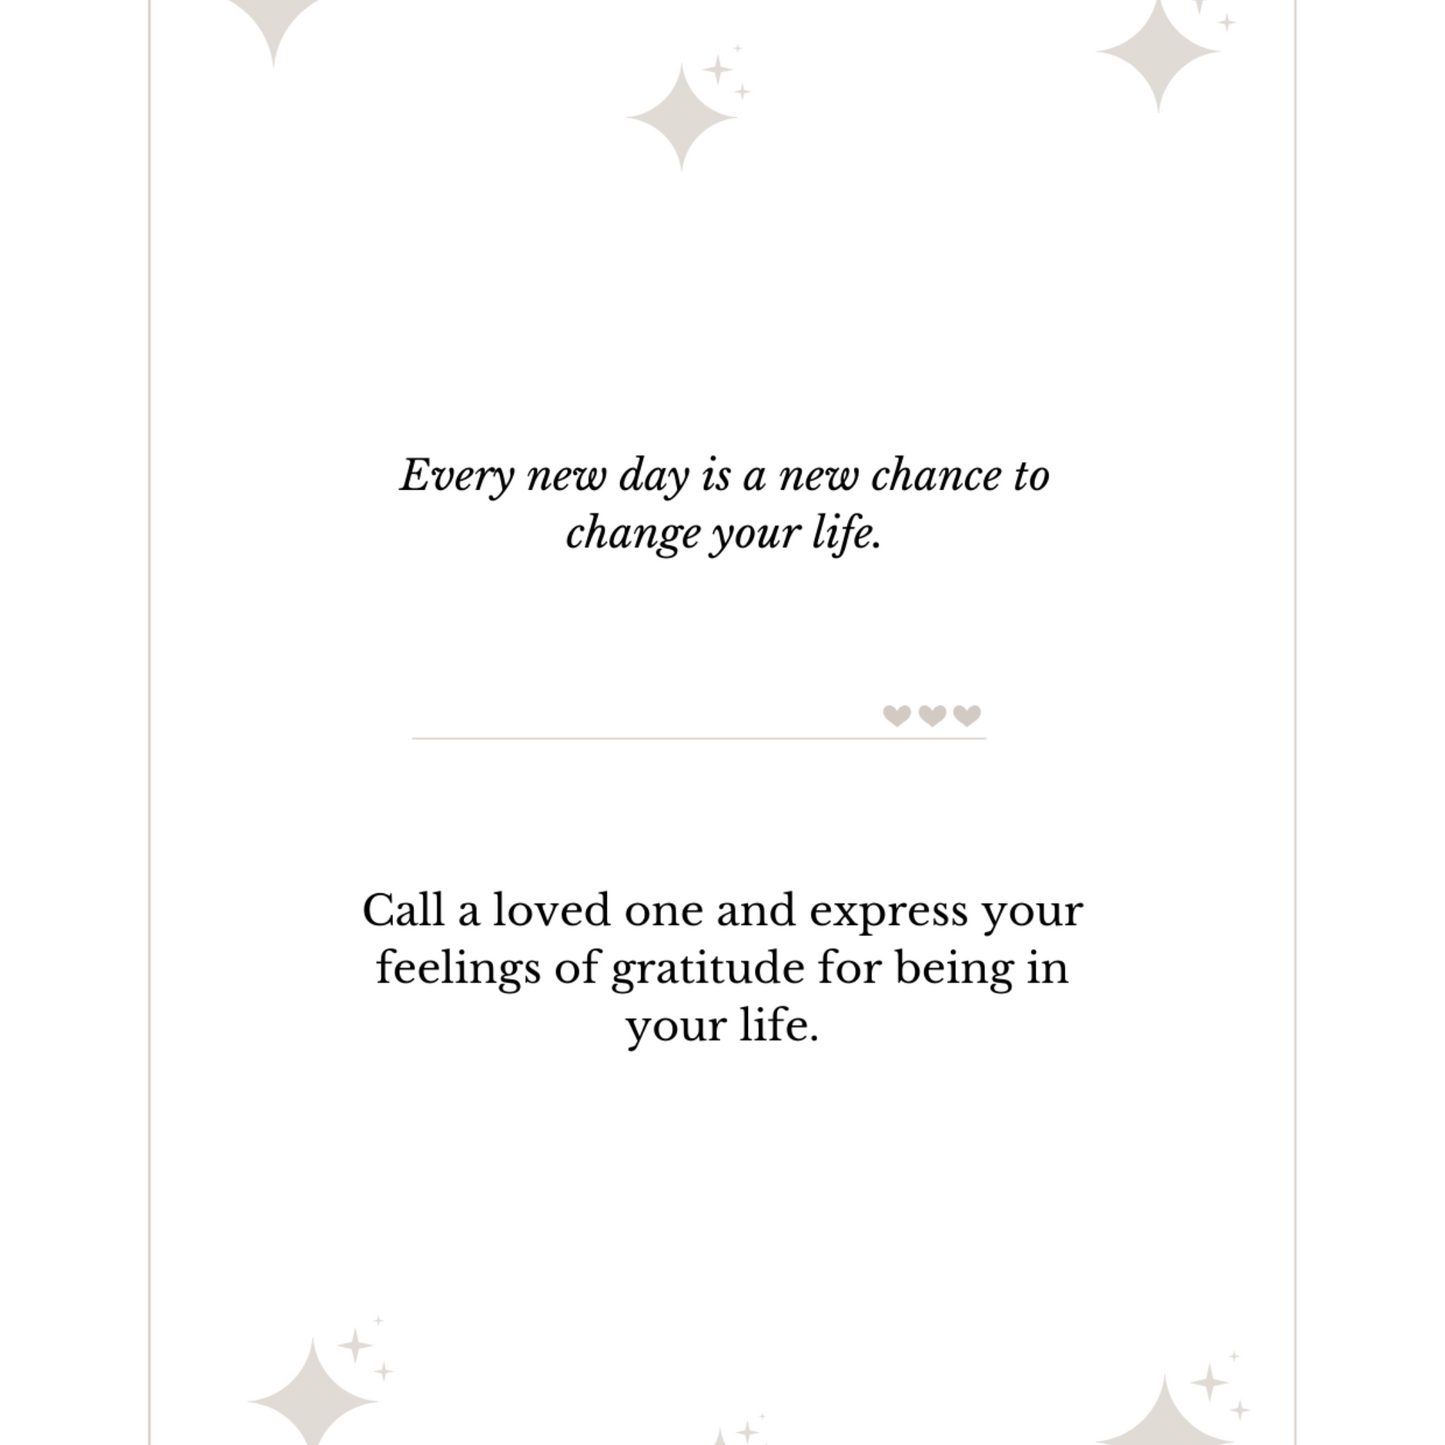 30 MINIMALIST CARDS, INSPIRATIONAL QUOTES + ACTIVITIES TO DO, ENGLISH VERSION